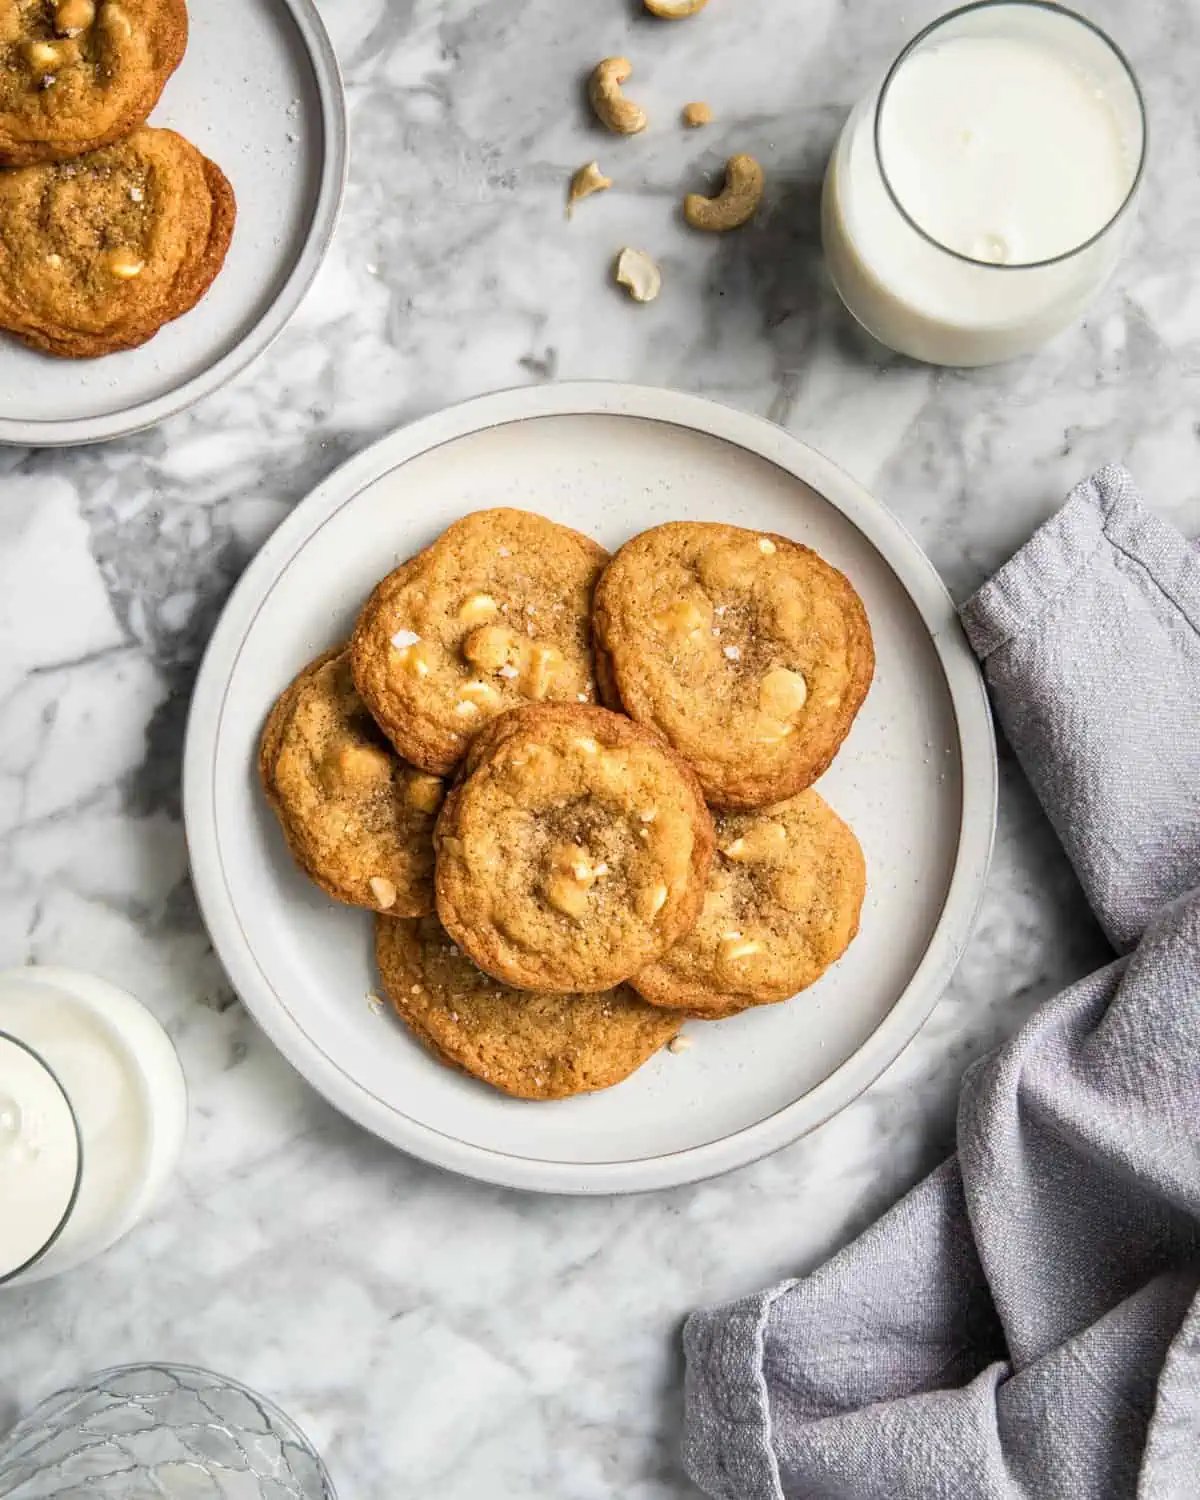 white chocolate chip cookies with cashews on a plate next to a glass of milk.